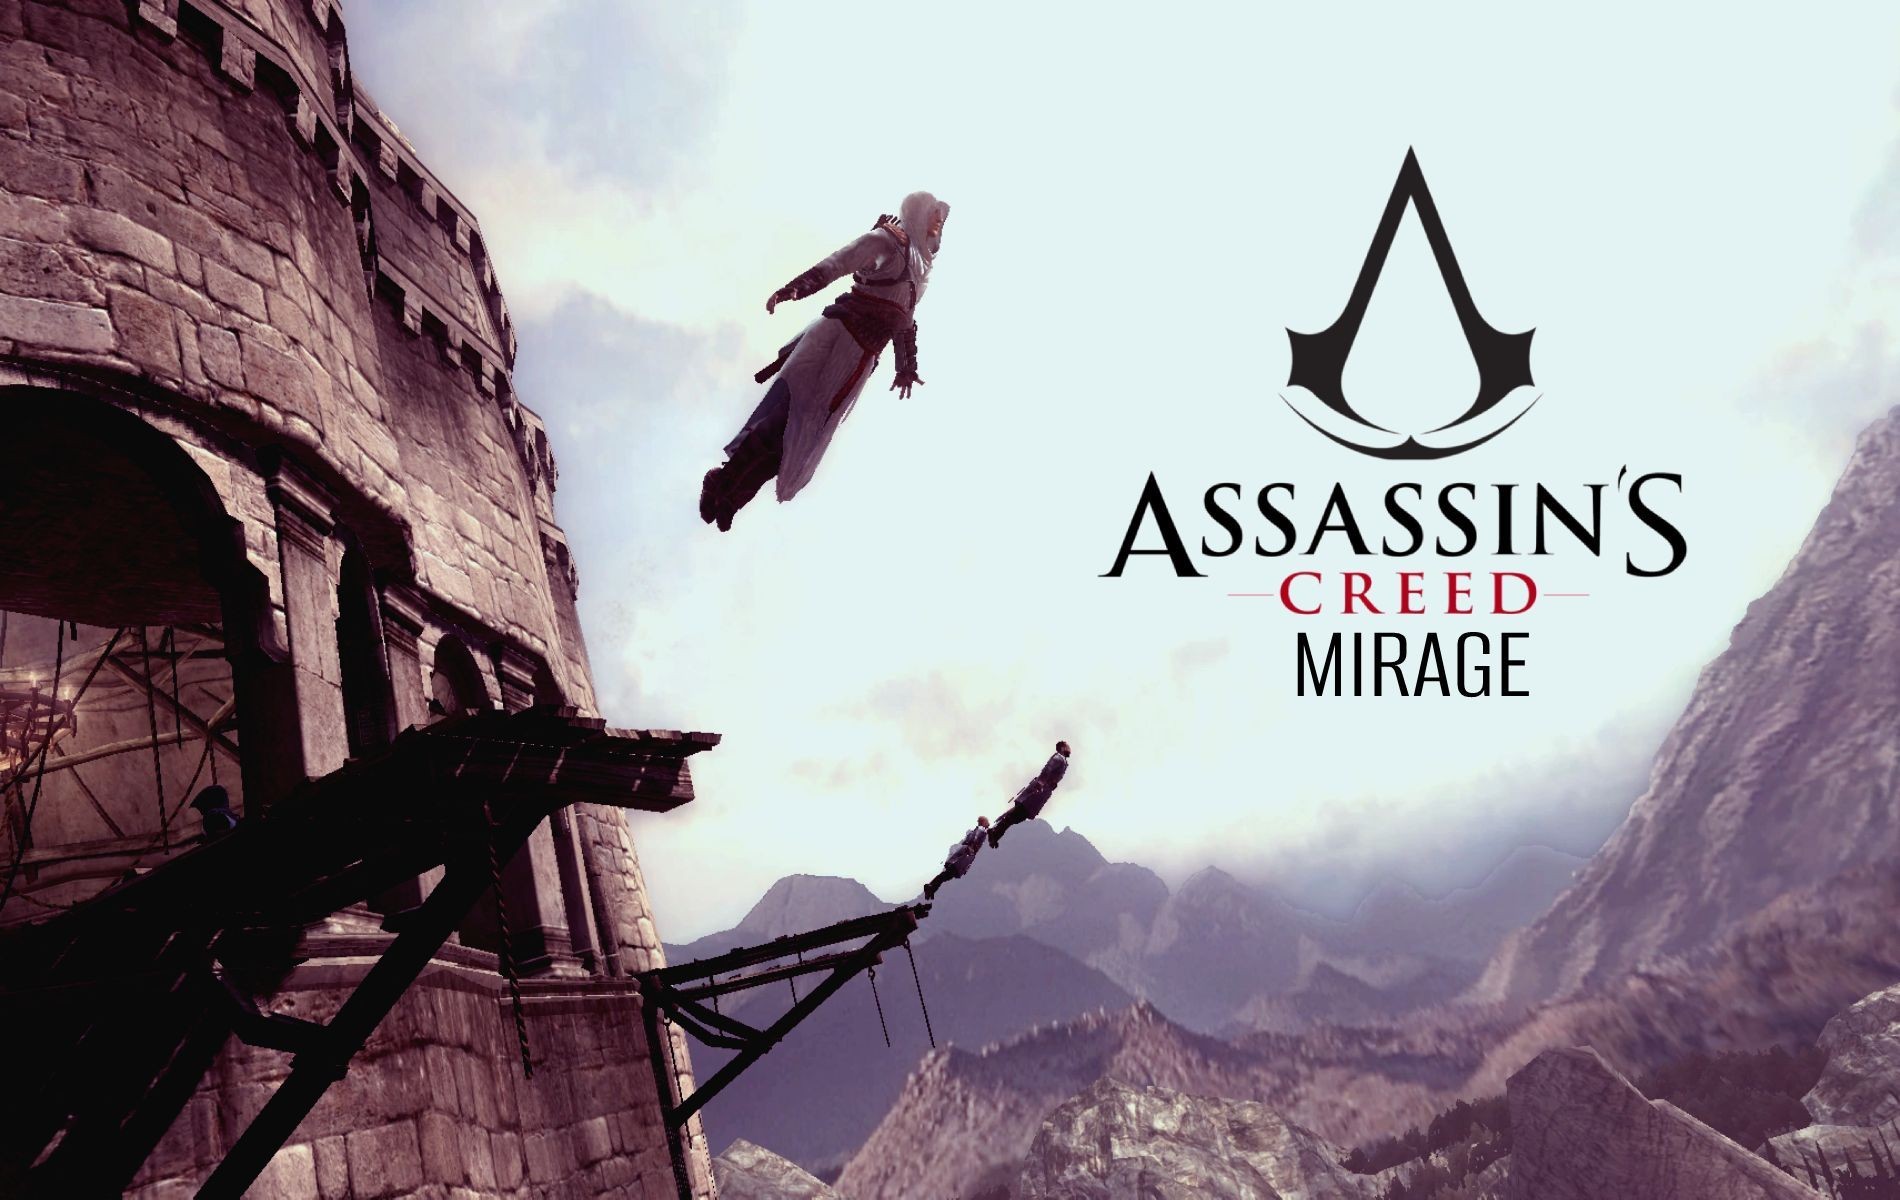 Assassin's Creed 'Mirage” reportedly departing from RPG genre, returning to roots with young Basim and AC1 remake